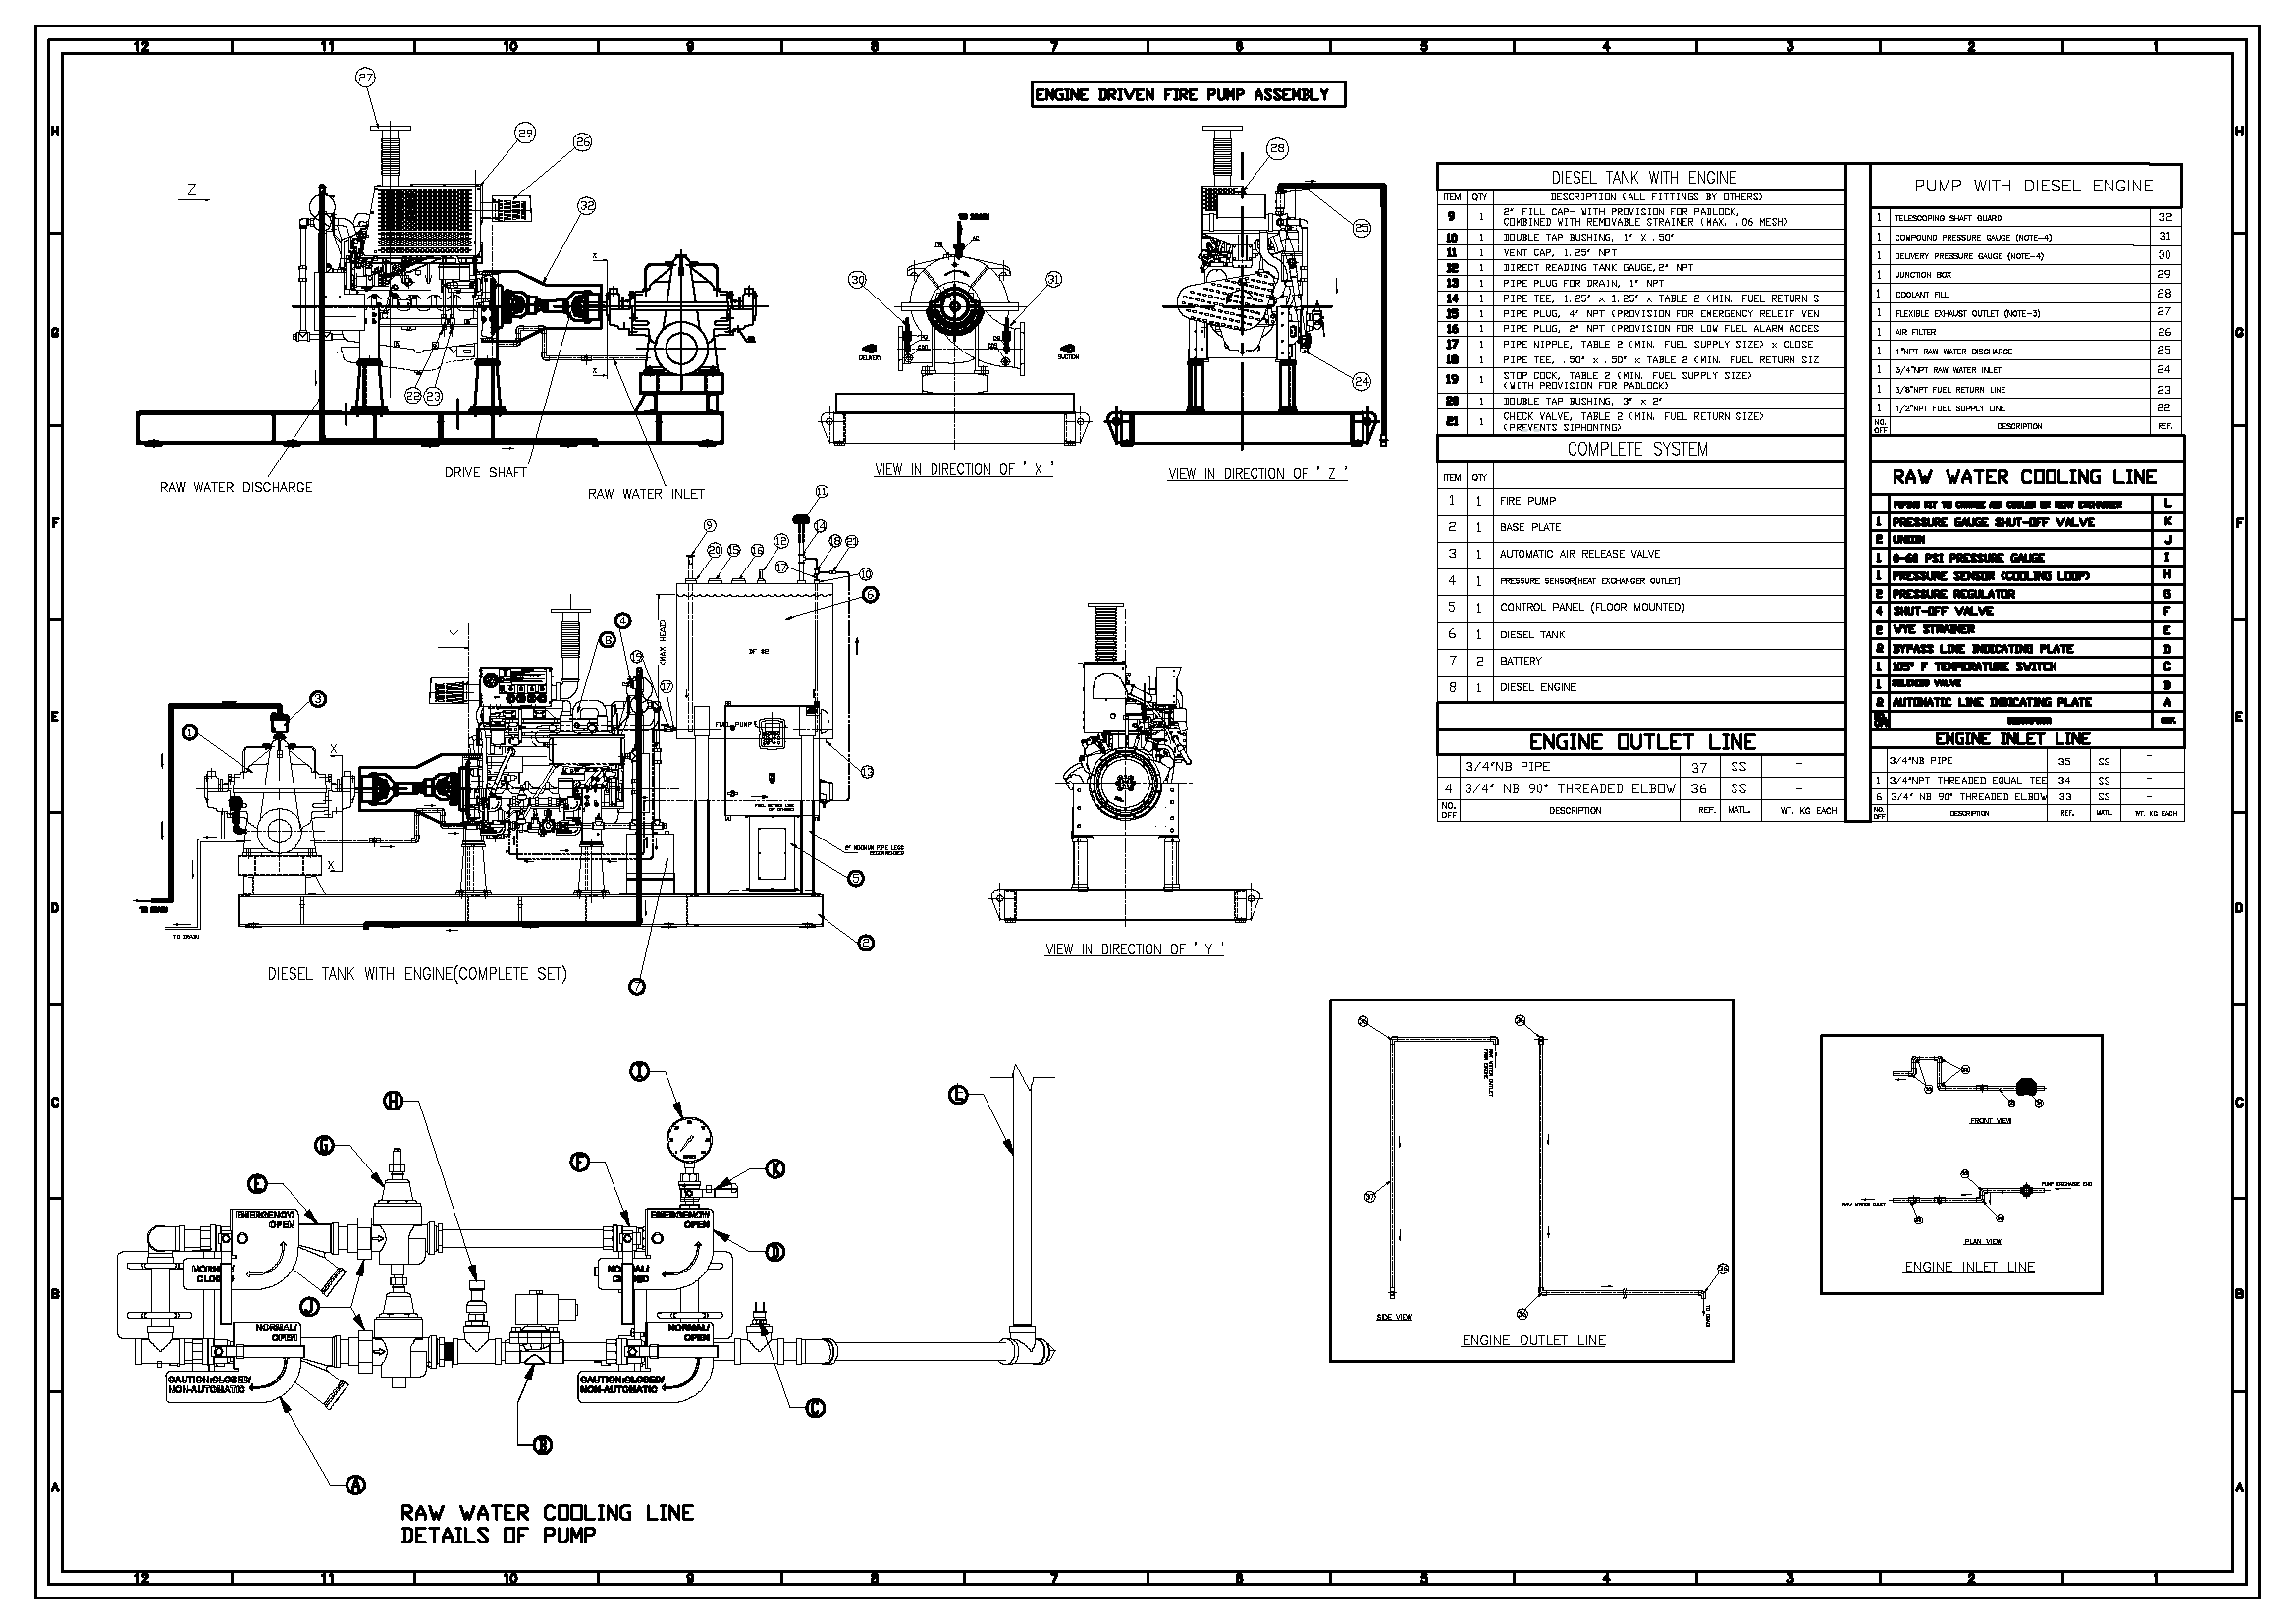 Engine Driven Fire Pump Assembly